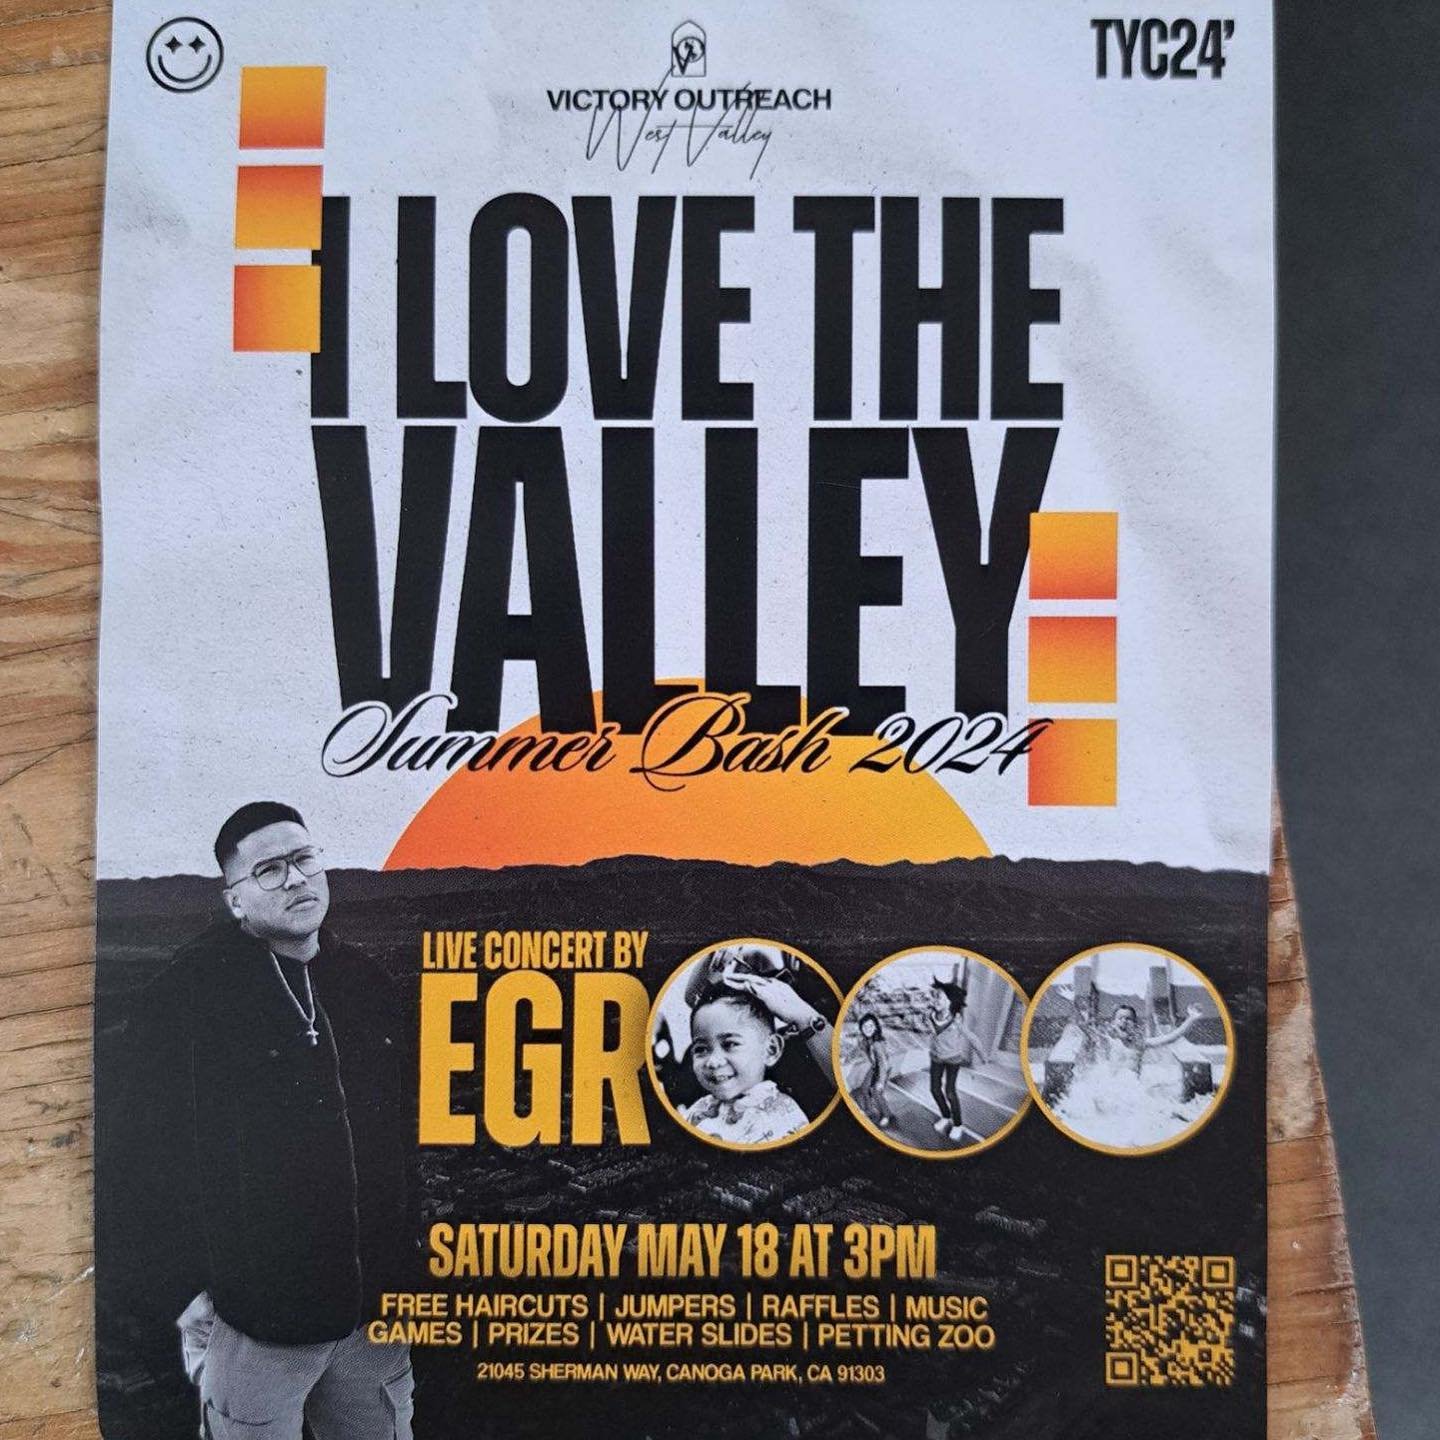 PERK will have a booth at tonight&rsquo;s &ldquo;I love the Valley Summer Bash 2024&rdquo; hosted by Victory Outreach Church of West Valley. 

Stop by for a fun family filled day and get exclusive PERK merch! 

📍Canoga Park, San Fernando Valley